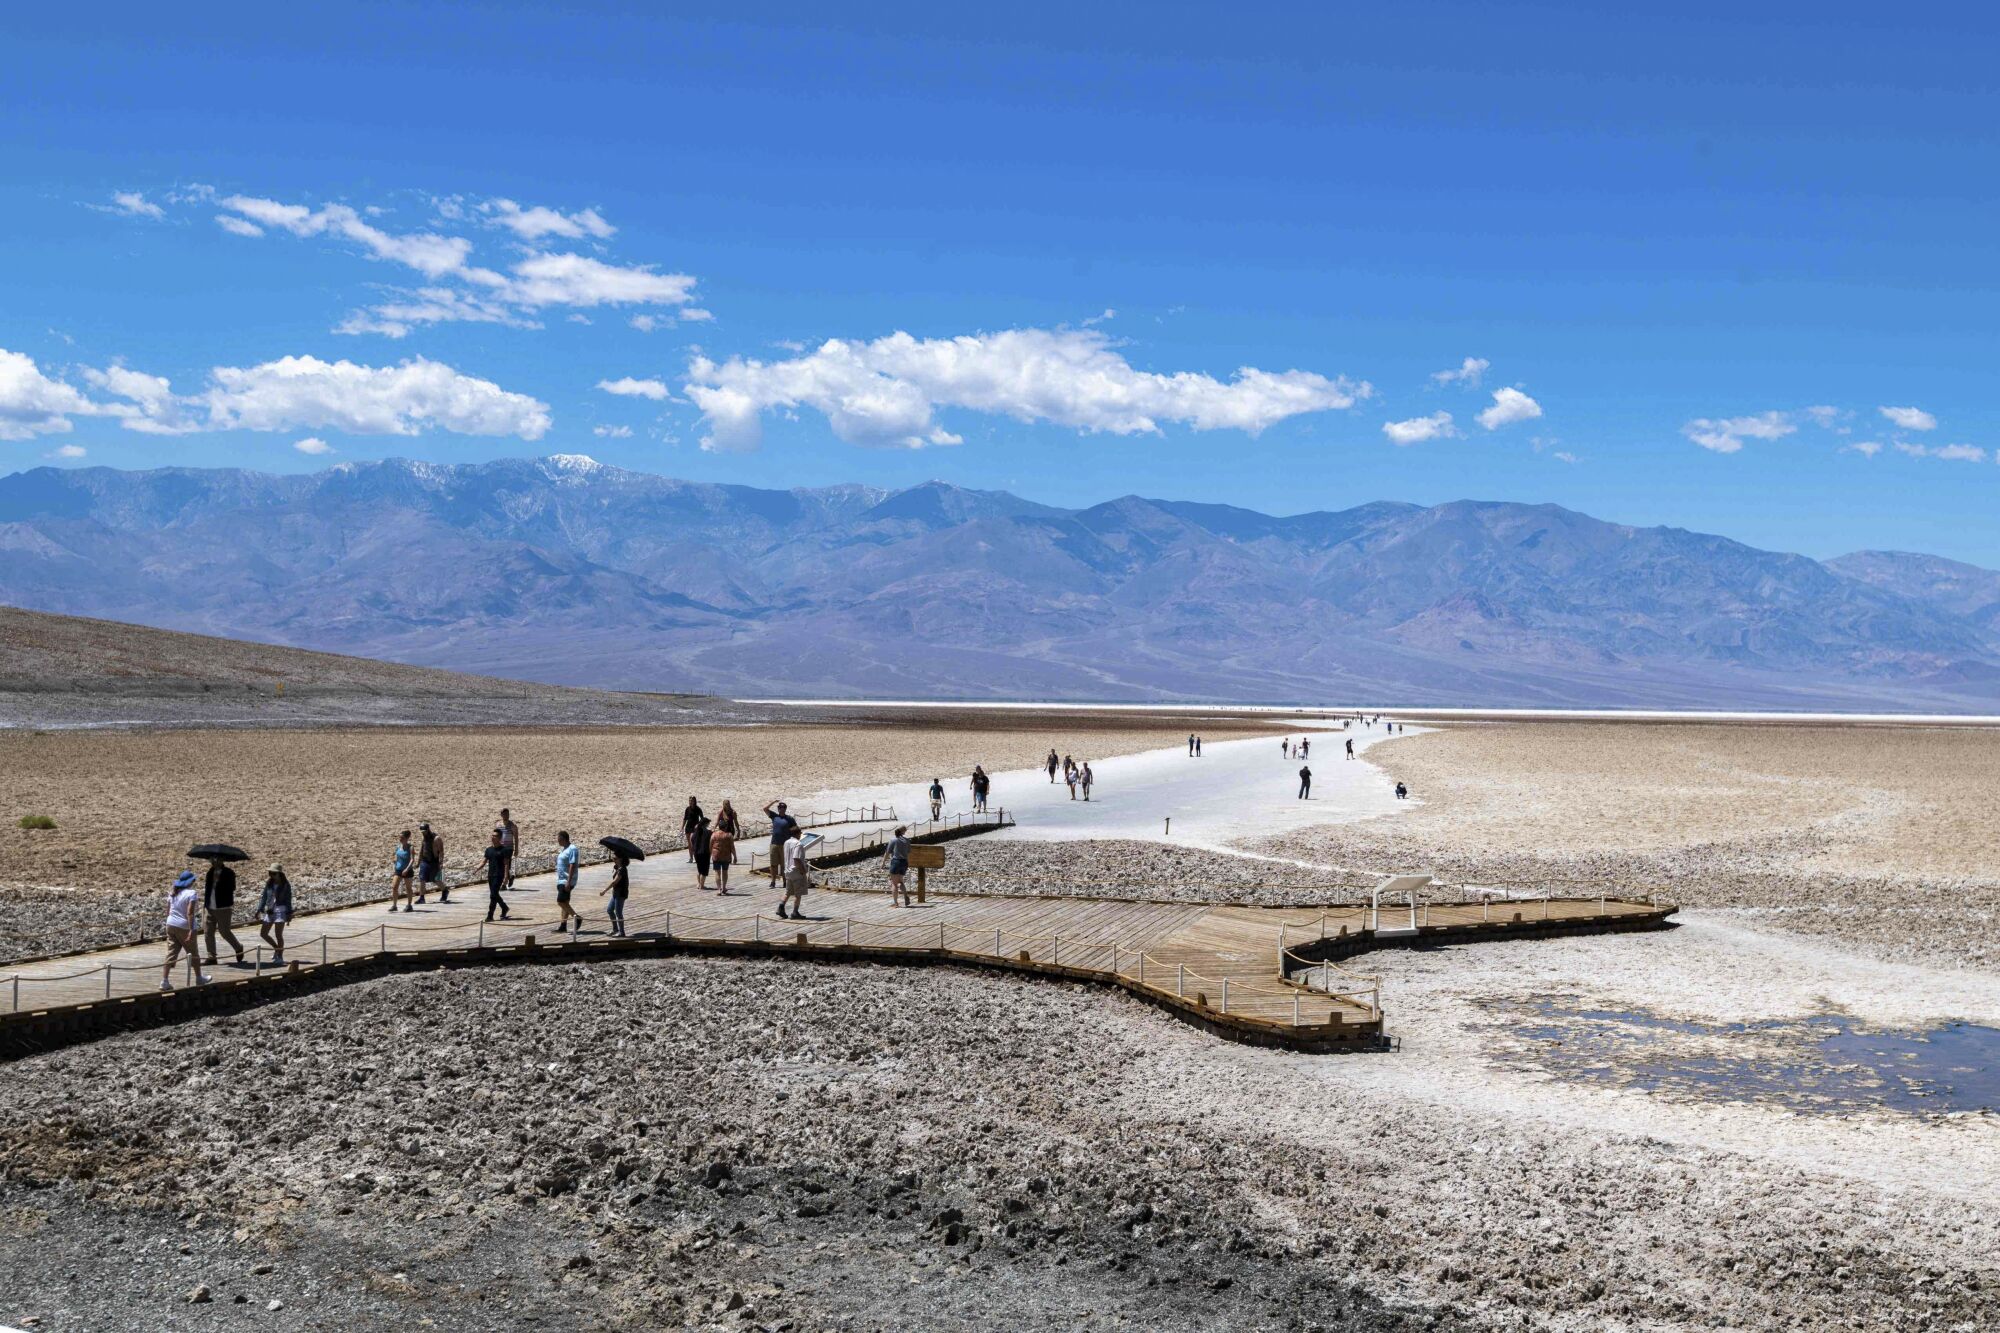 People walk in Badwater Basin, a dry lake bed, with mountains in the distance.